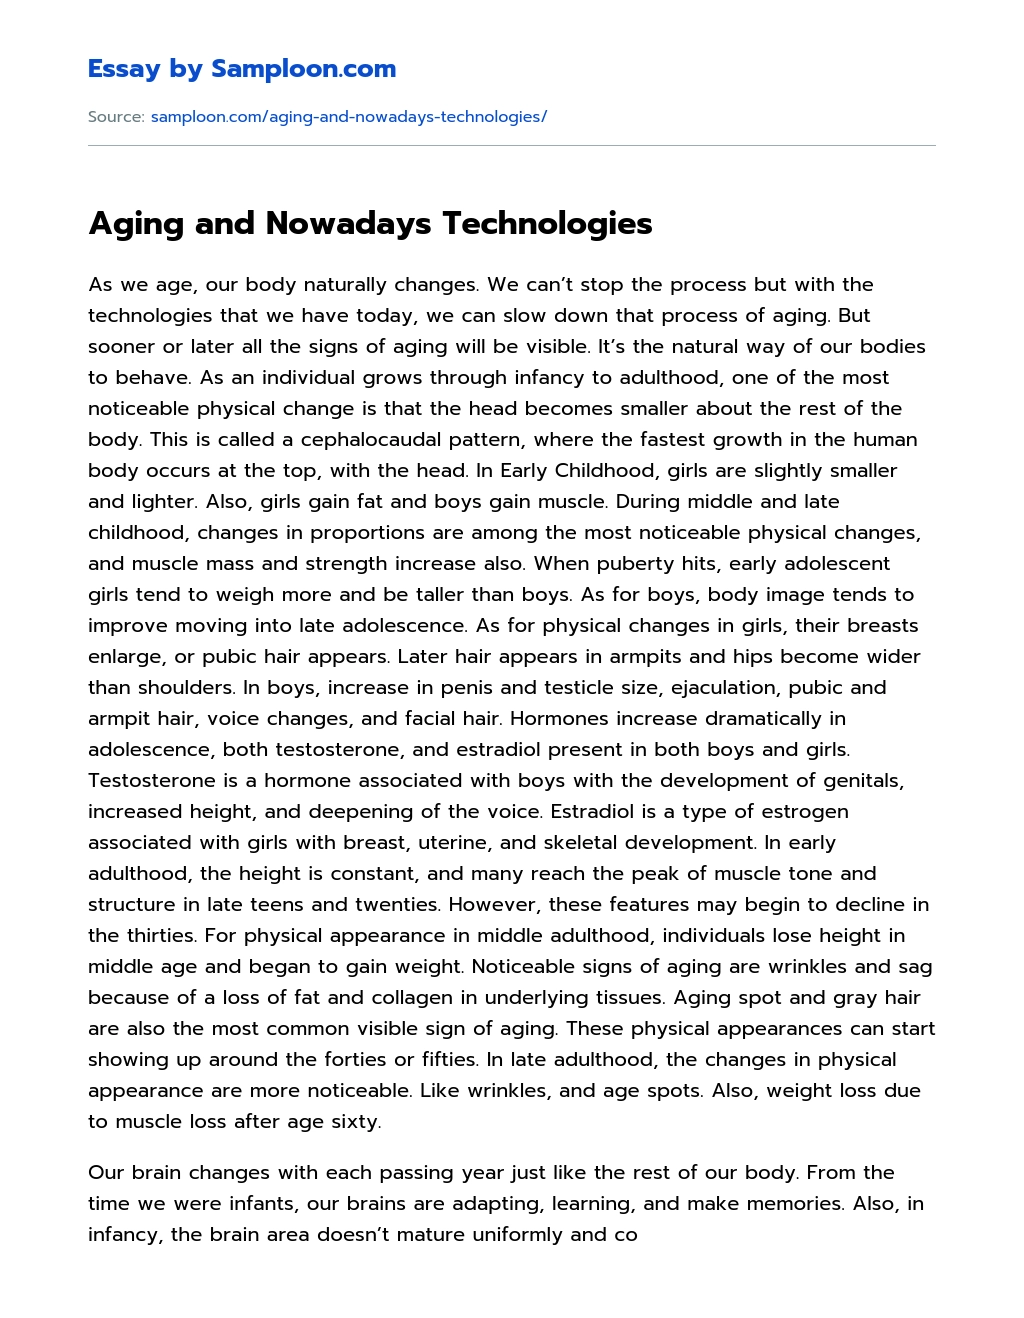 Aging and Nowadays Technologies essay